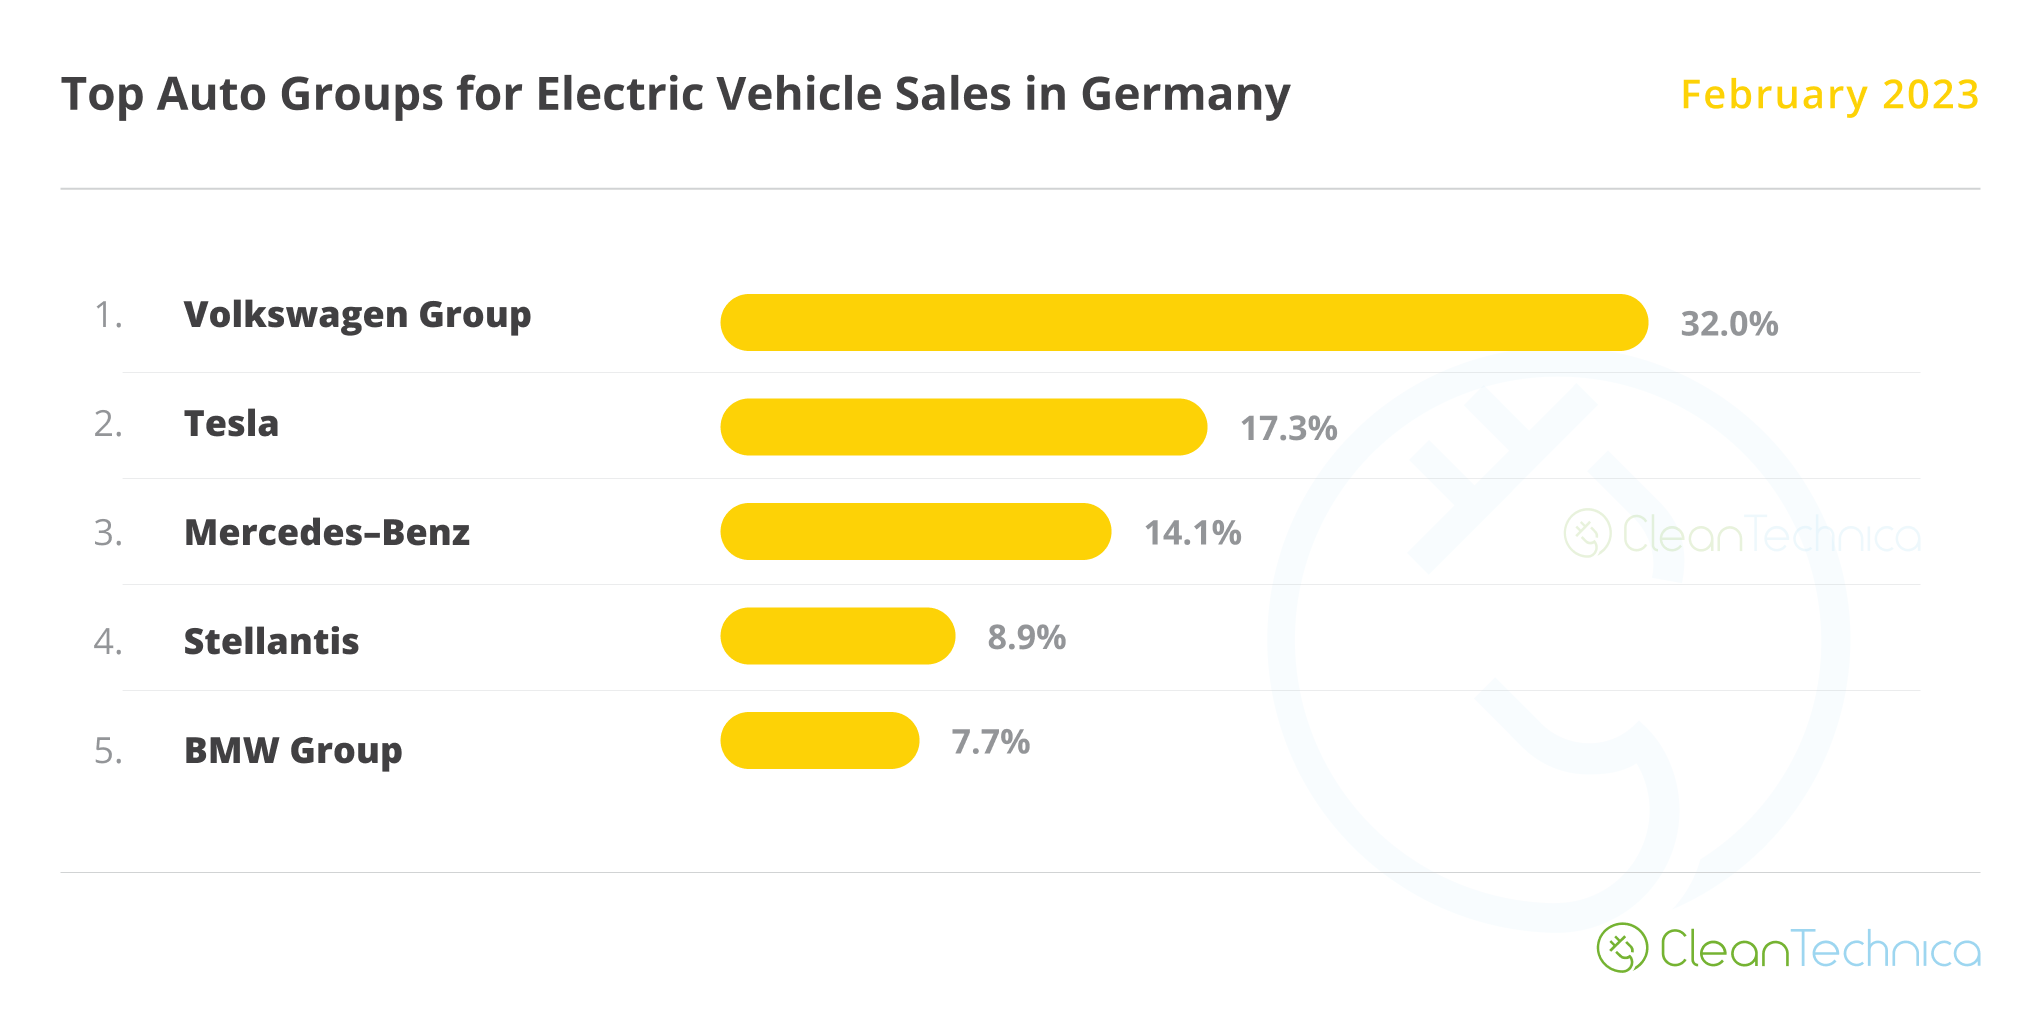 Auto Groups Selling the Most Electric Vehicles in Germany